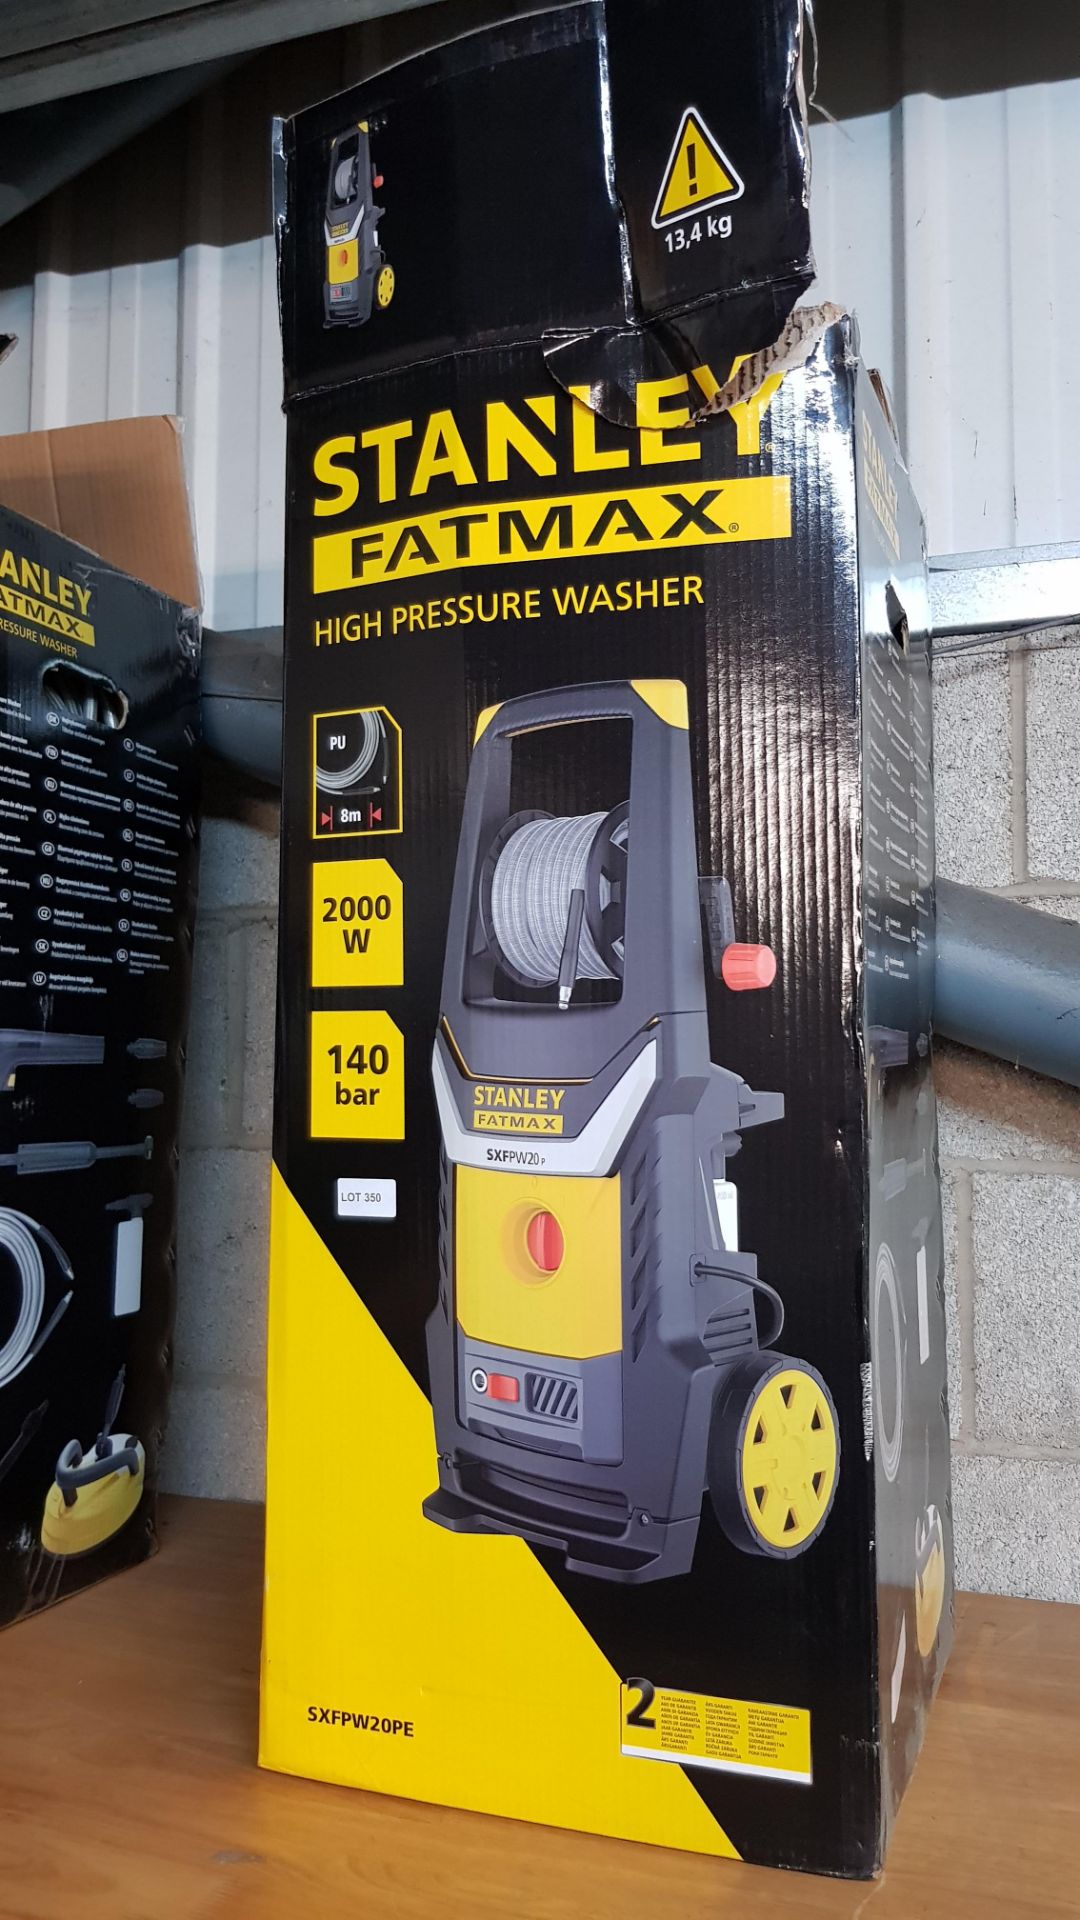 (R14D) 1 X Stanley Fatmax High Pressure Washer 200W 140 Bar - Image 2 of 2